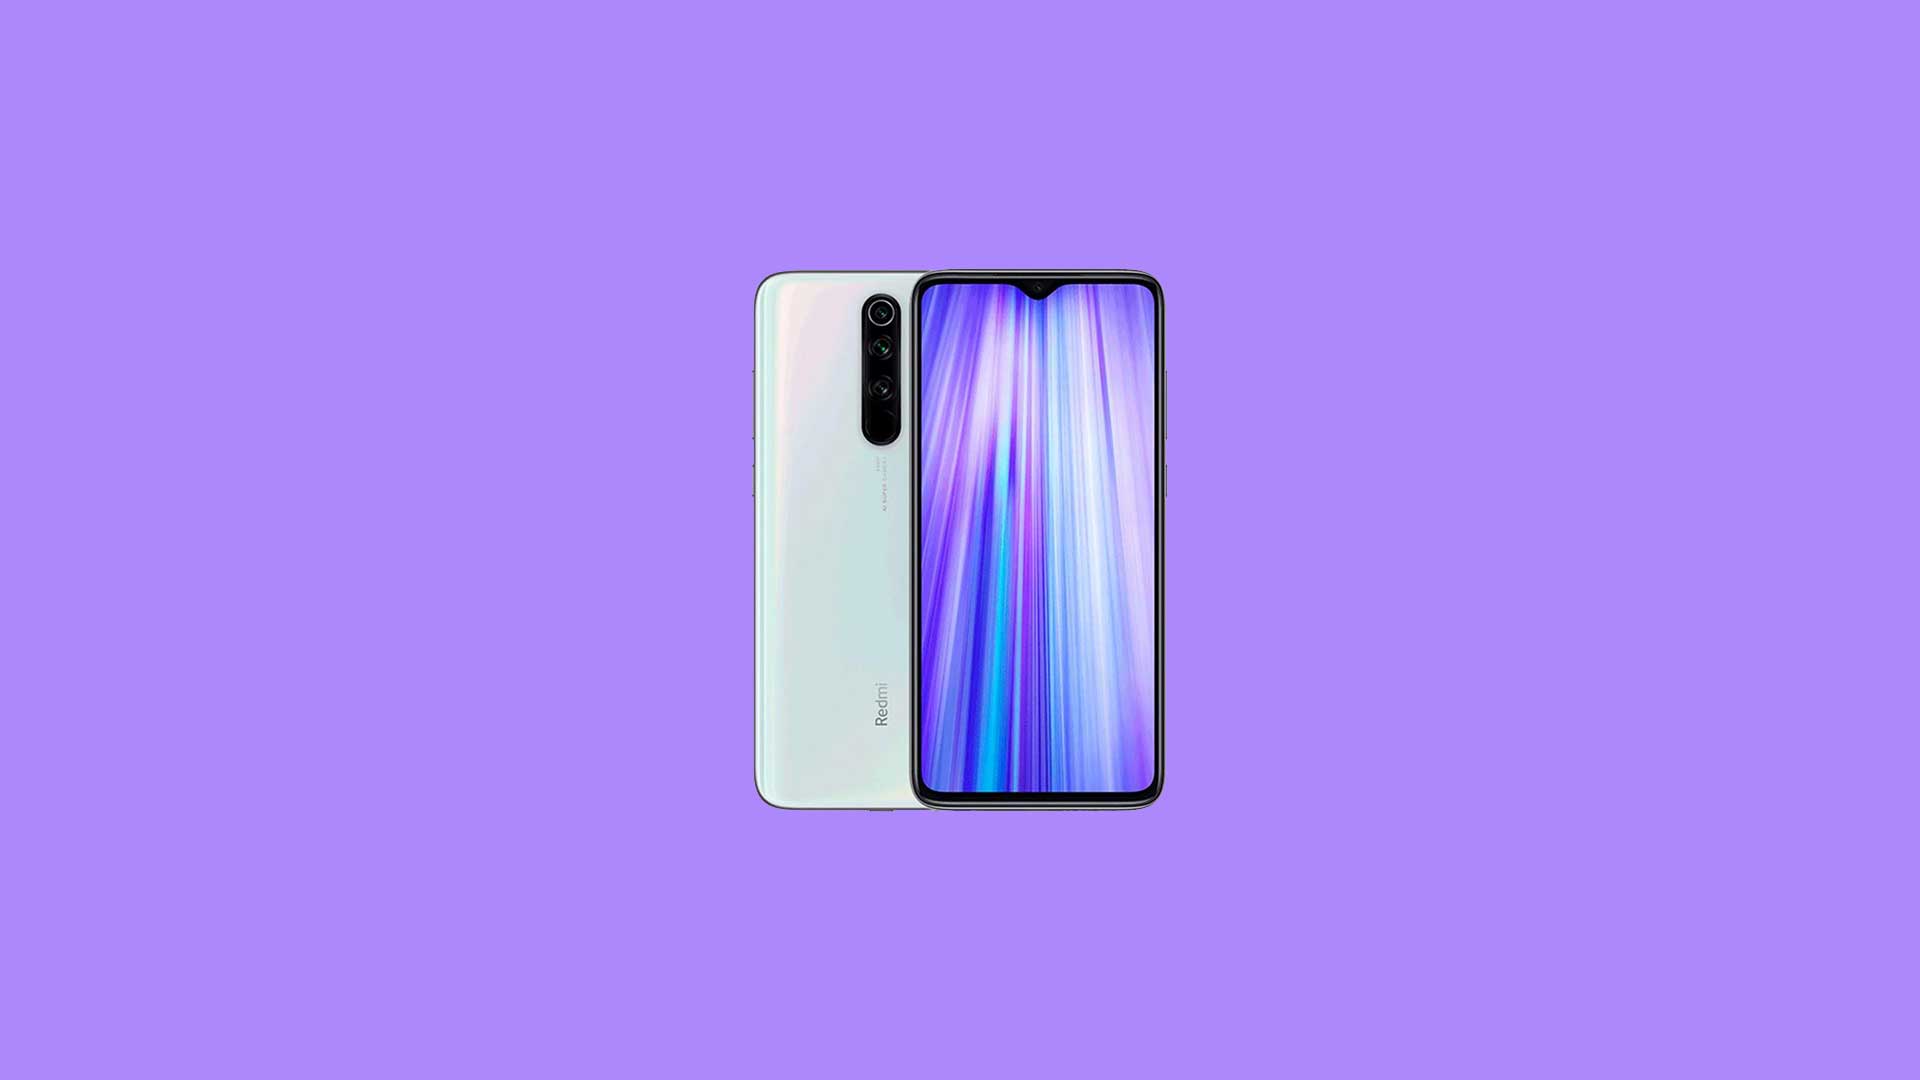 How to Install Official TWRP Recovery on Redmi Note 8 Pro and Root it